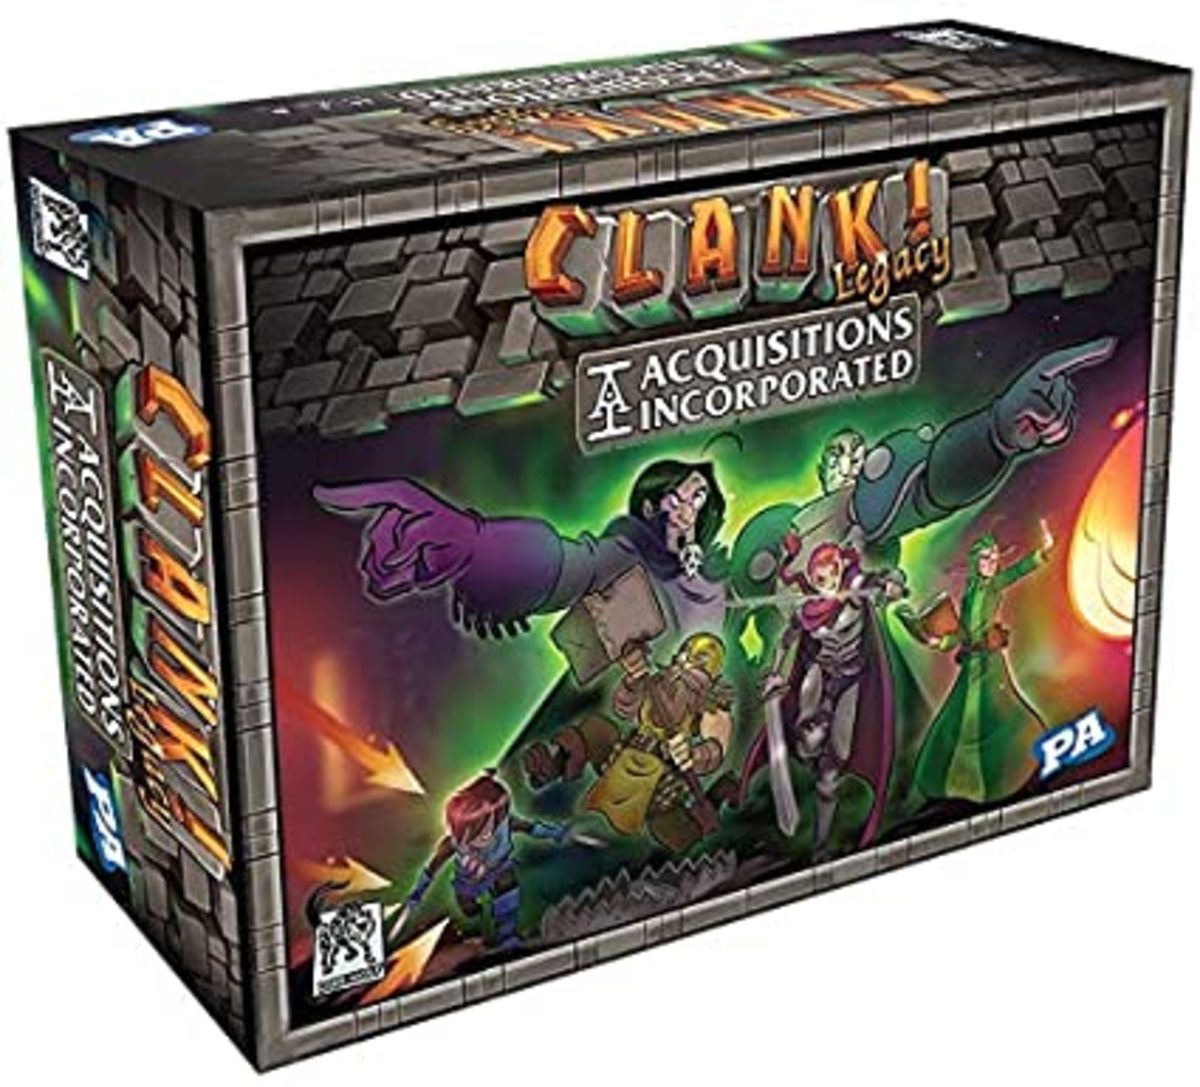 "Clank! Legacy: Acquisitions Incorporated"